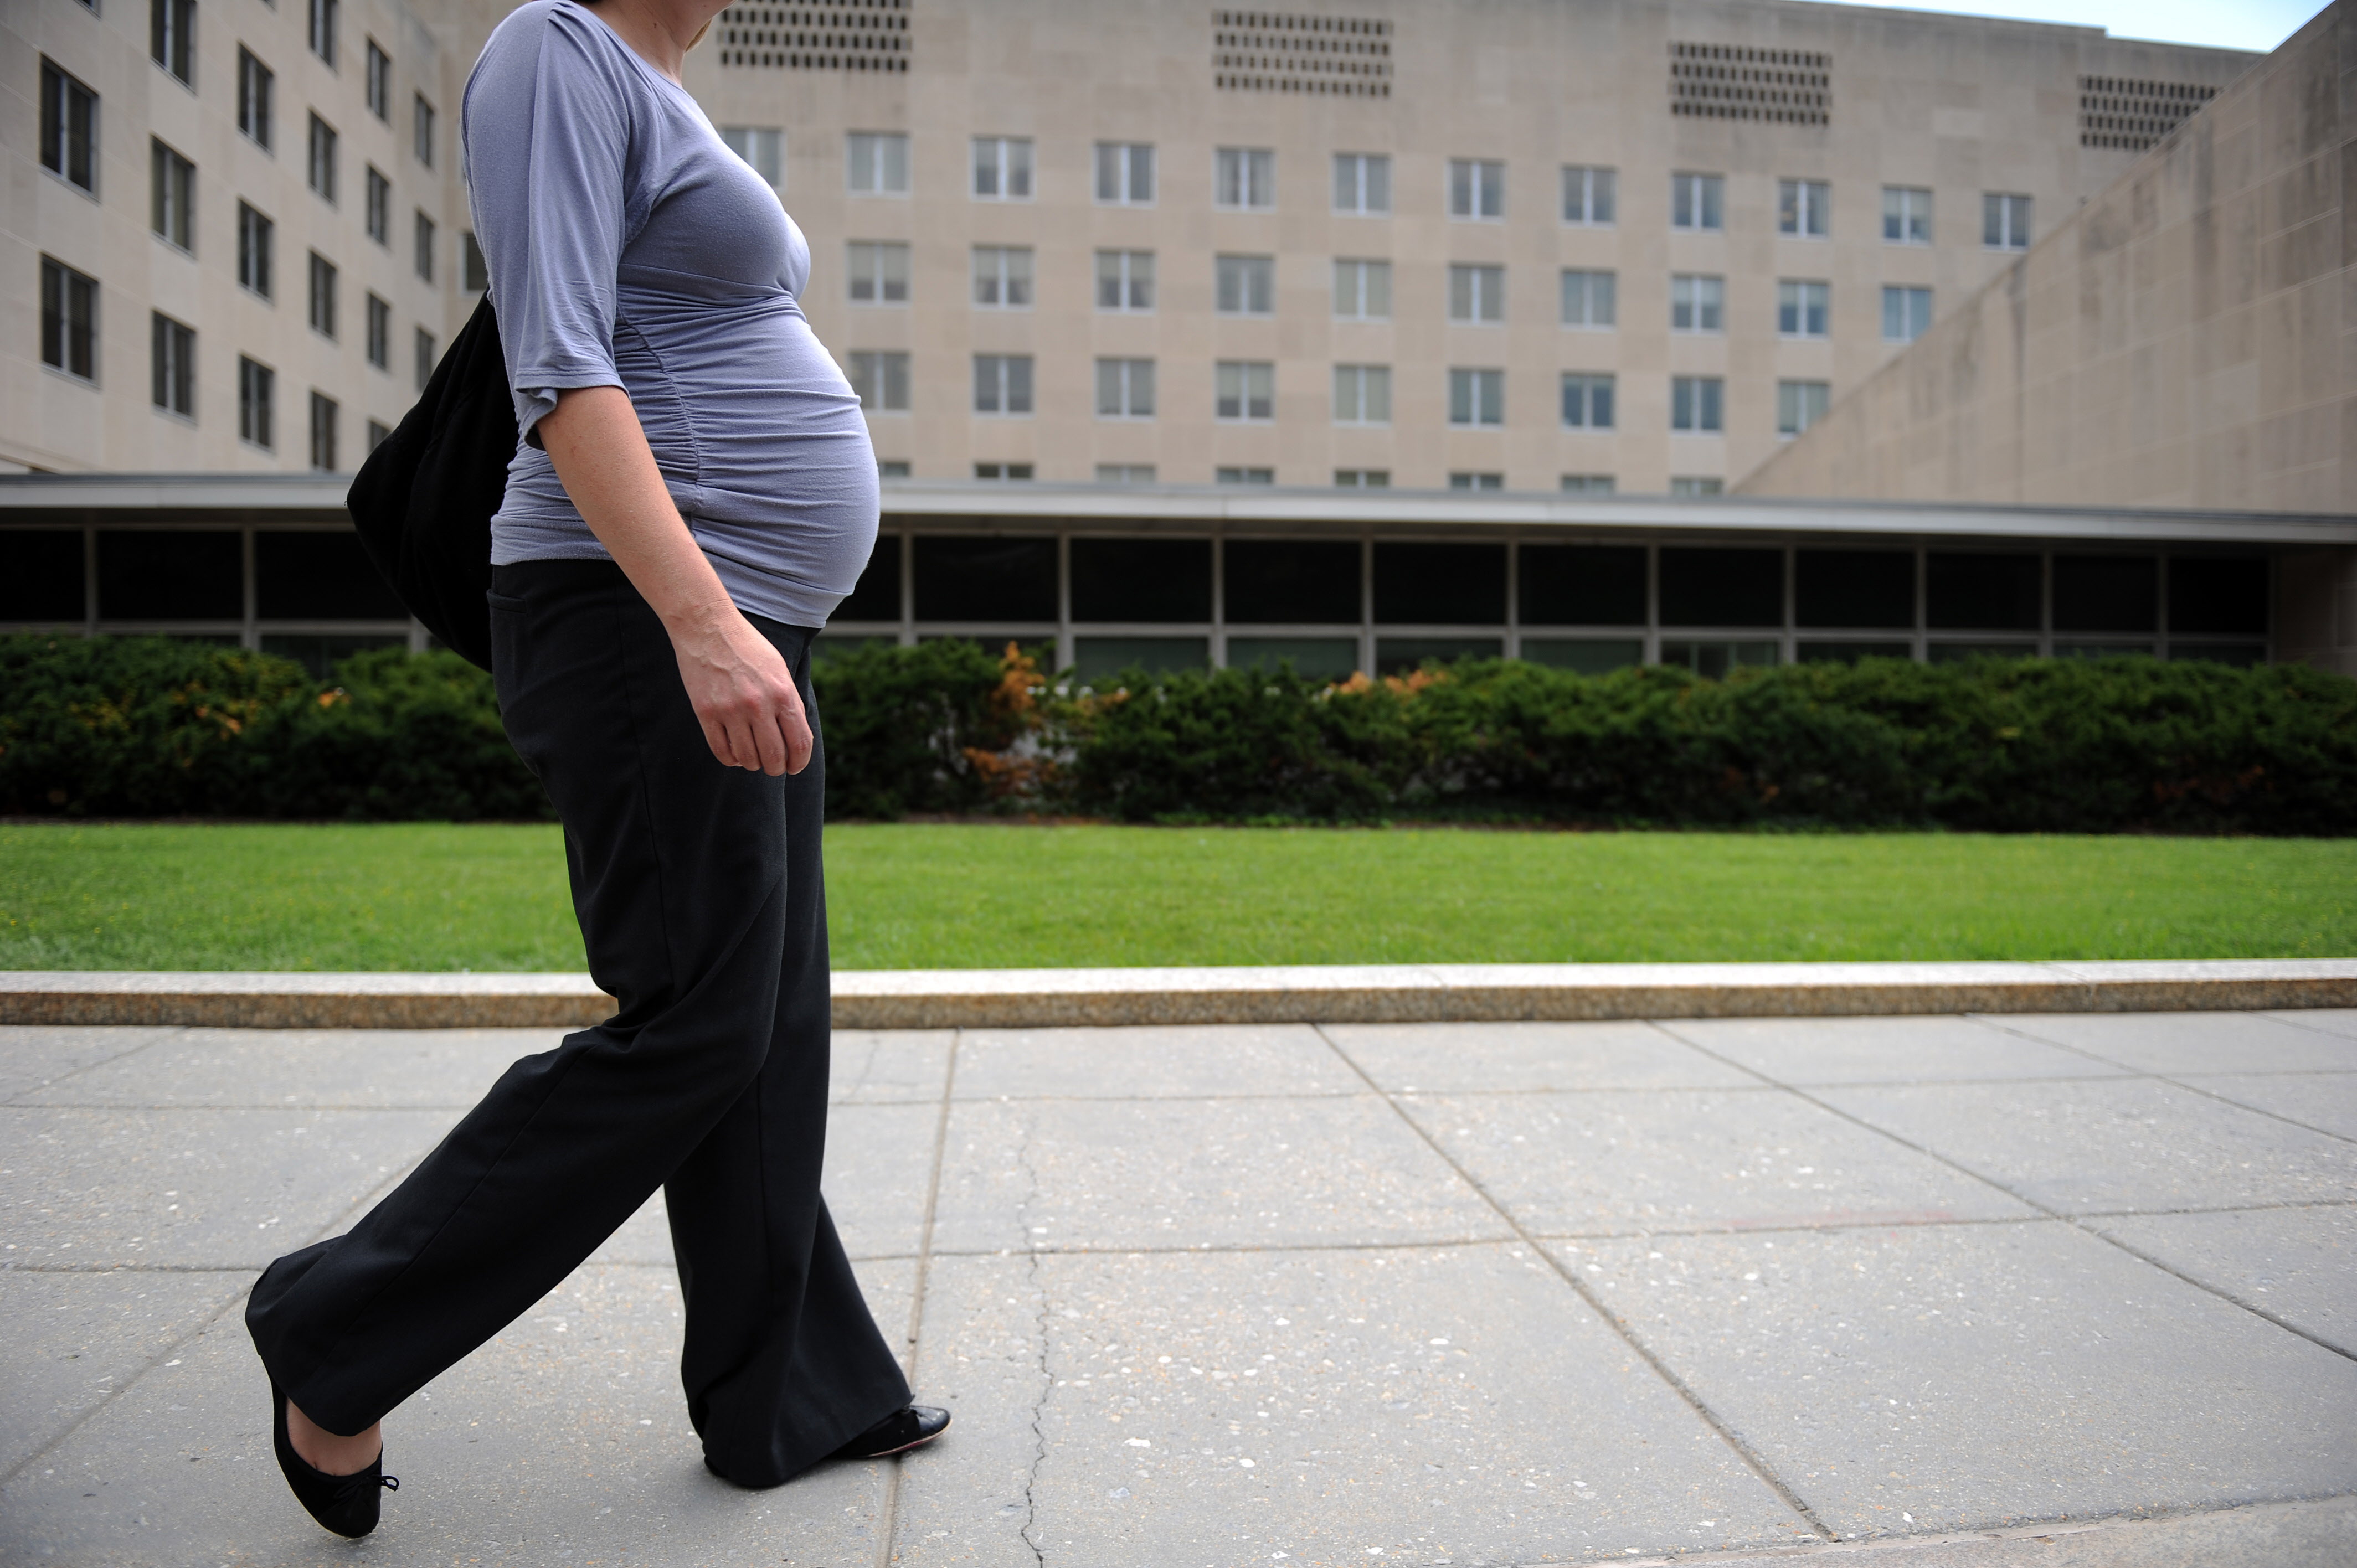 (FILES) This file photo taken on August 5, 2010 shows a pregnant woman walking outside the State Department in Washington, DC.   Morning sickness is linked to a lower risk of miscarriage, according to research out September 26, 2016 that suggests a woman's nausea and vomiting early in pregnancy may have protective effects for the fetus.Between 50 and 80 percent of pregnant women report feeling nauseous or throwing up during their first trimester, said the findings in the Journal of the American Medical Association (JAMA) Internal Medicine.  / AFP PHOTO / Timothy SLOAN